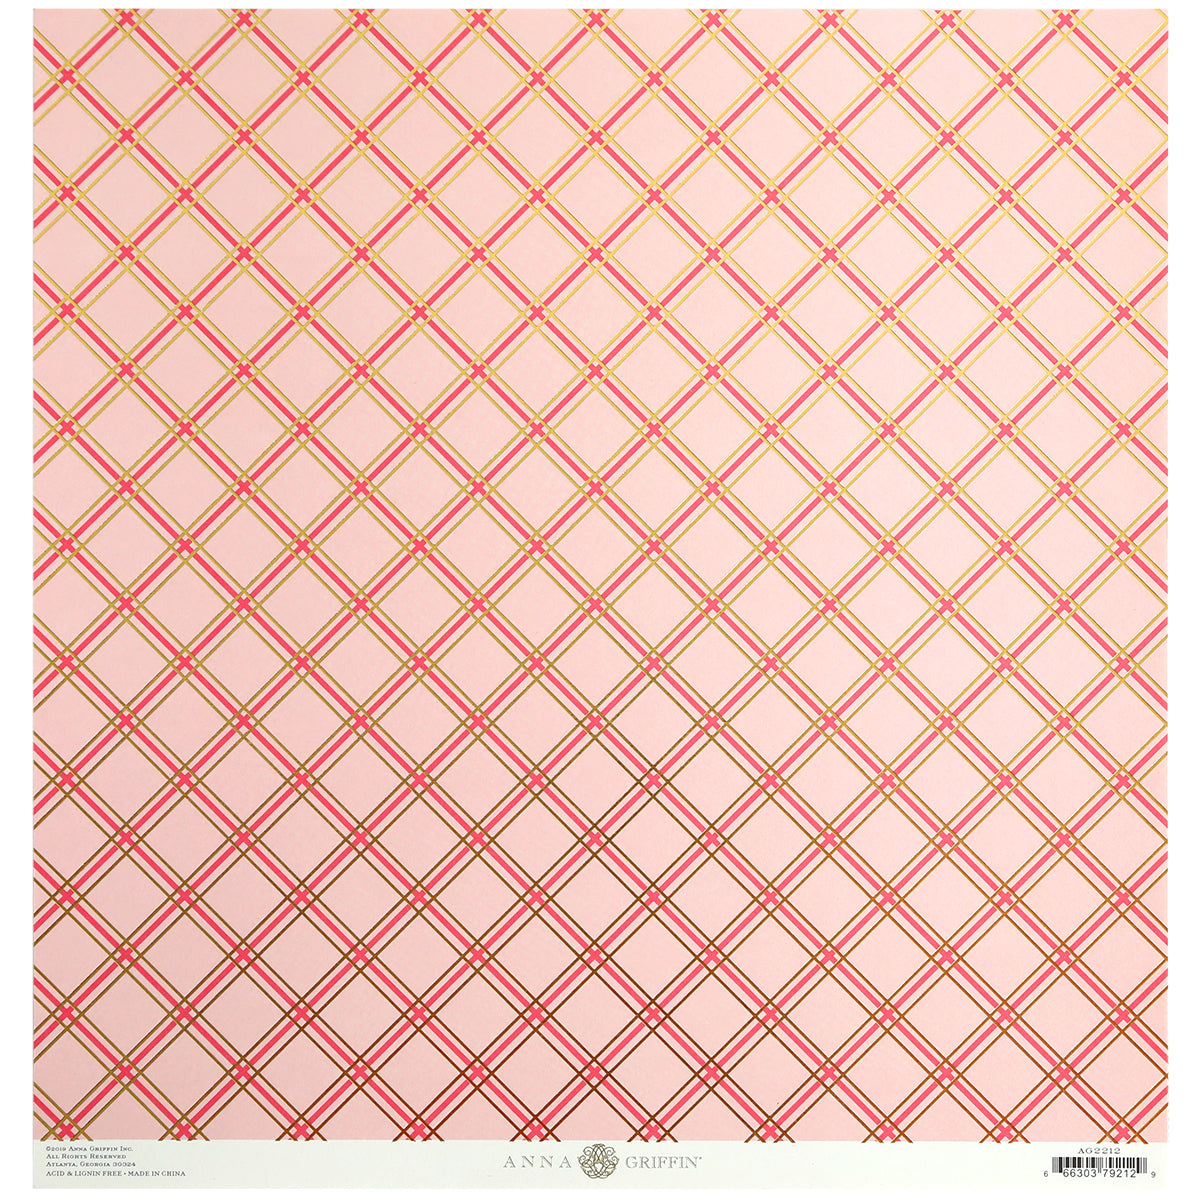 a red and white checkered pattern on a pink background.